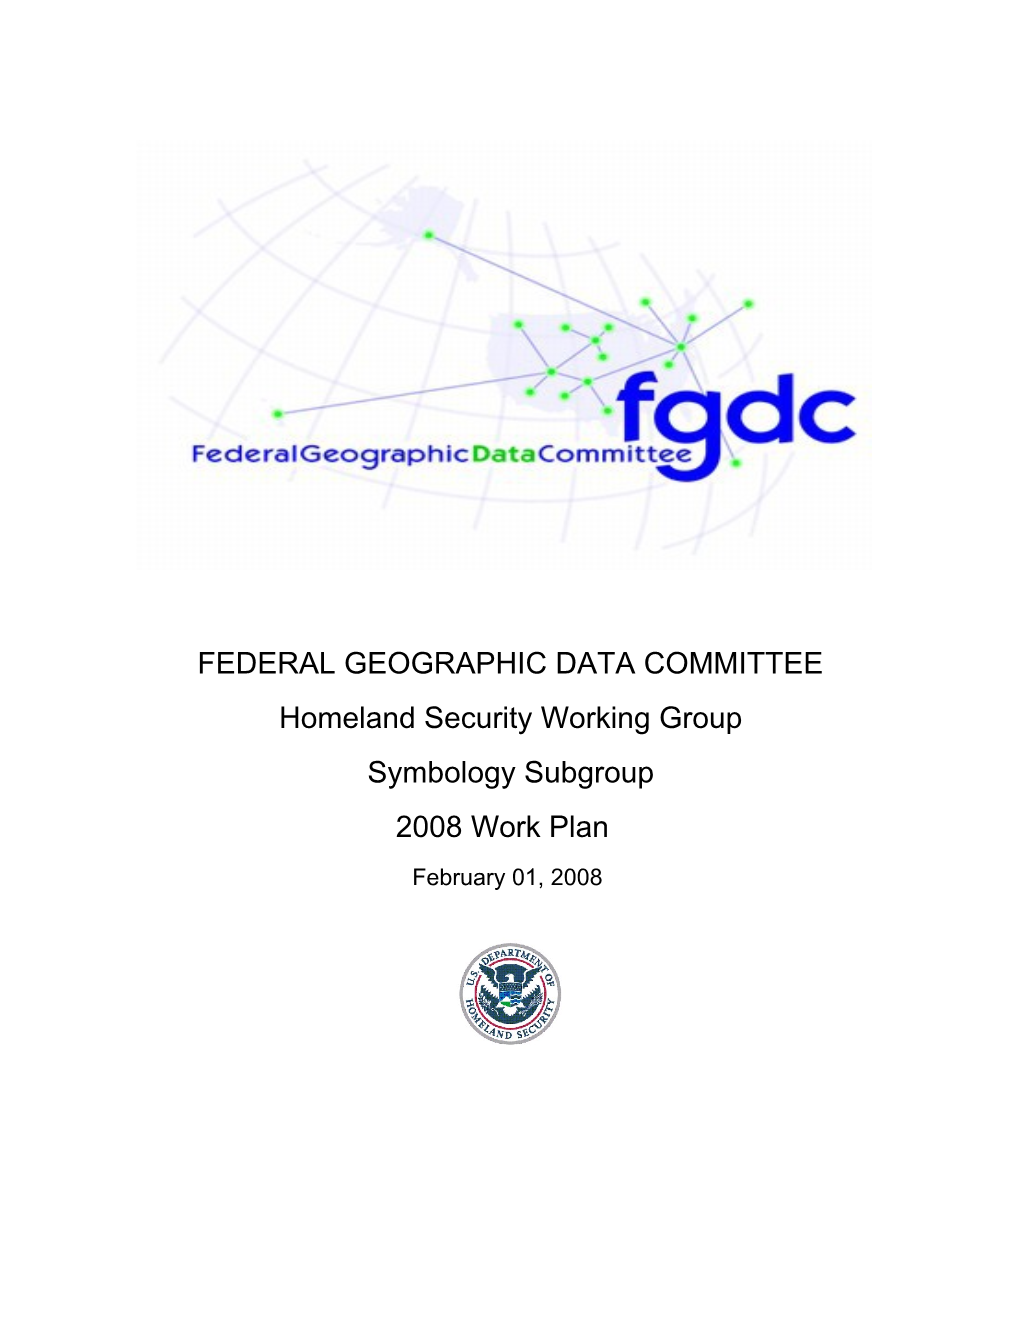 Federal Geographic Data Committee